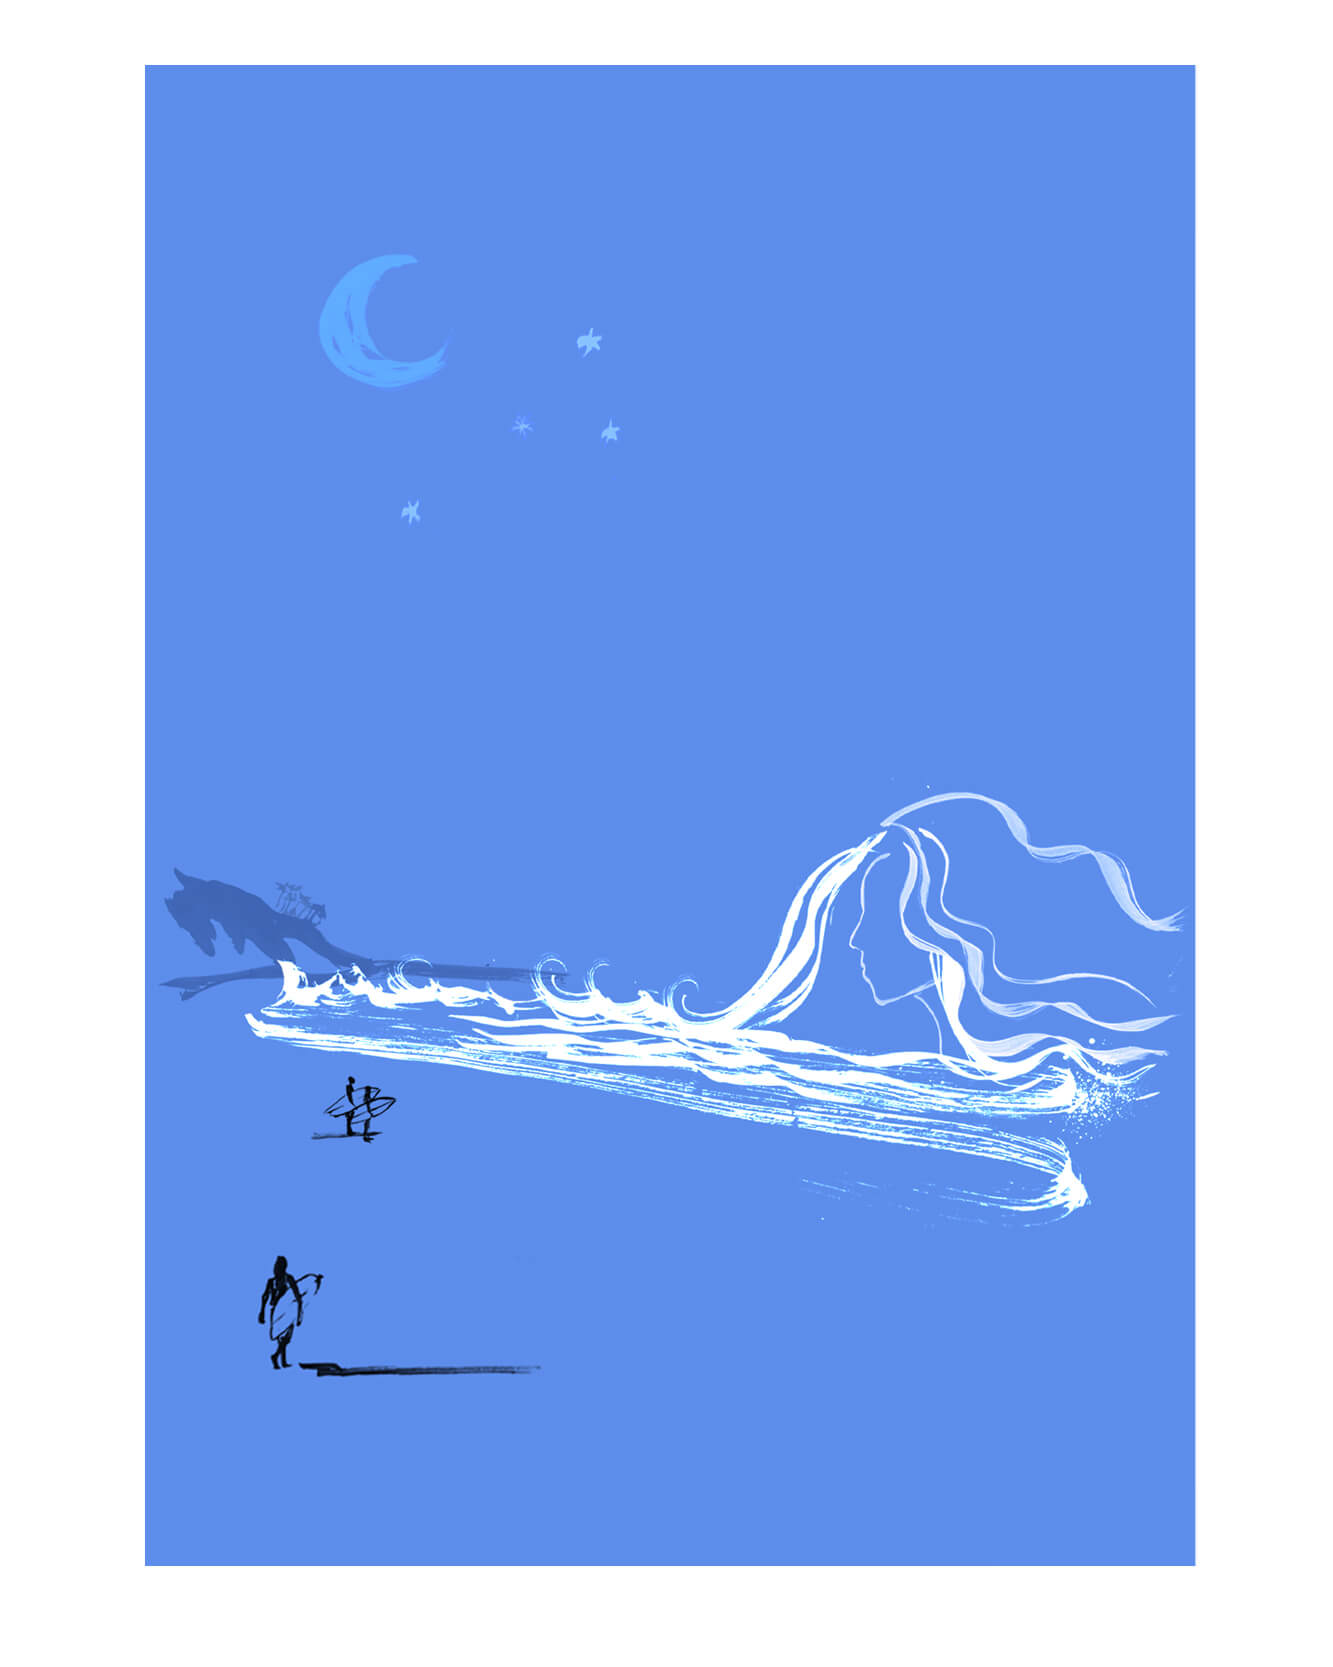 Editorial illustration for Outside magazine. An essay on how a girl transformed herself into a chill ocean girl - shifting her identity to 'fit in' with surfers culture in California. Linear paint stroke style illustration with blue background and white lines. A young girls profile raising up out the ocean on the California coastline.